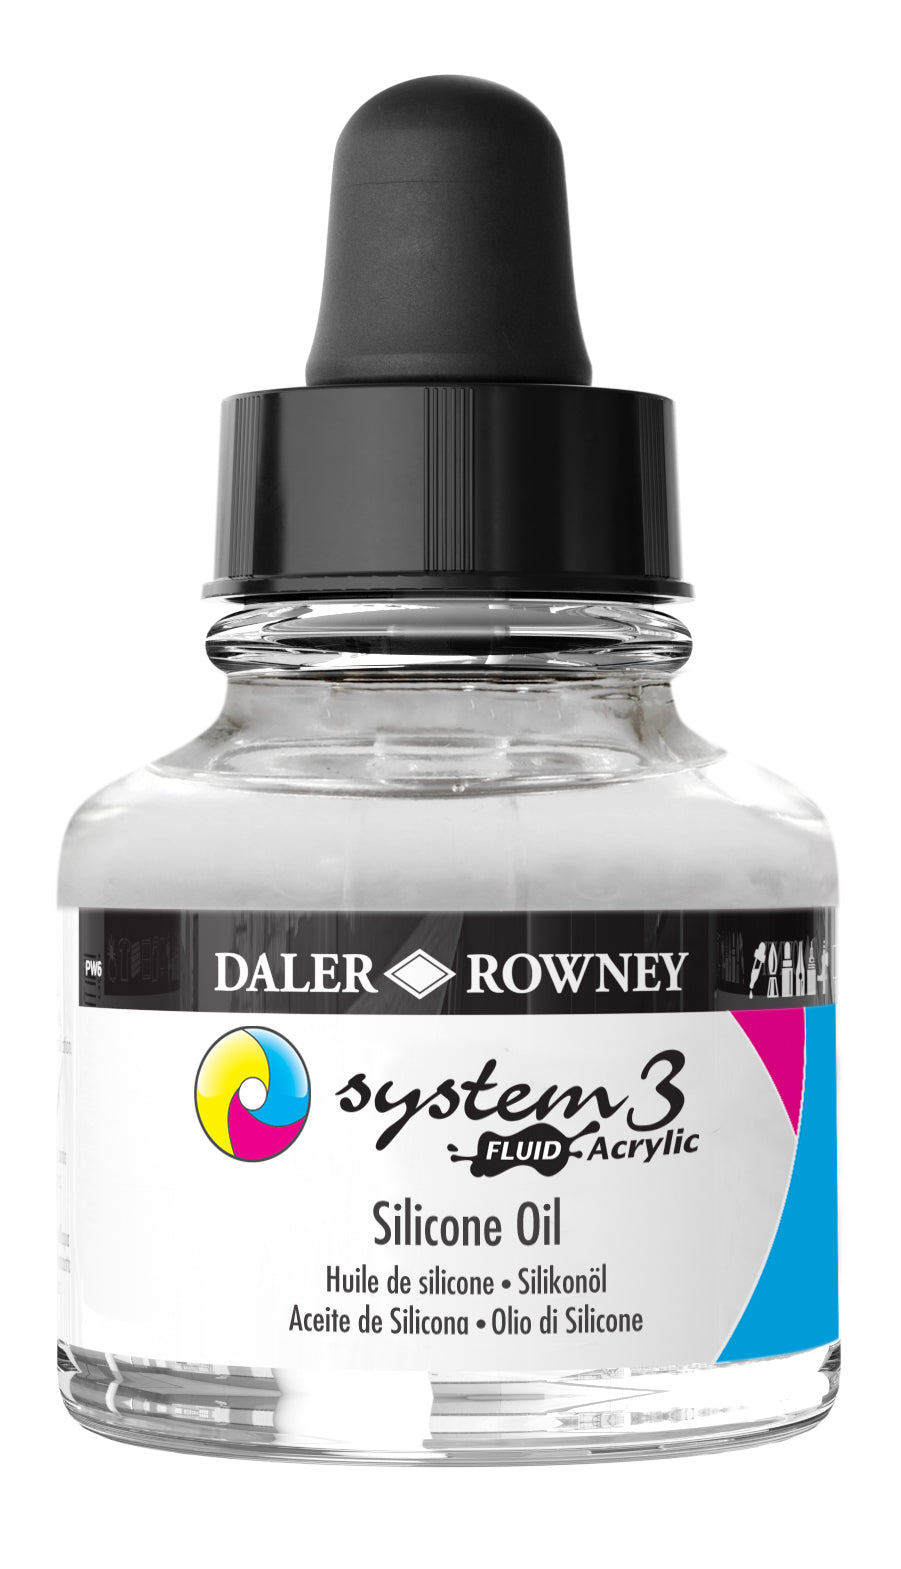 Daler Rowney System 3 Pouring Silicone Oil 29.5 ml